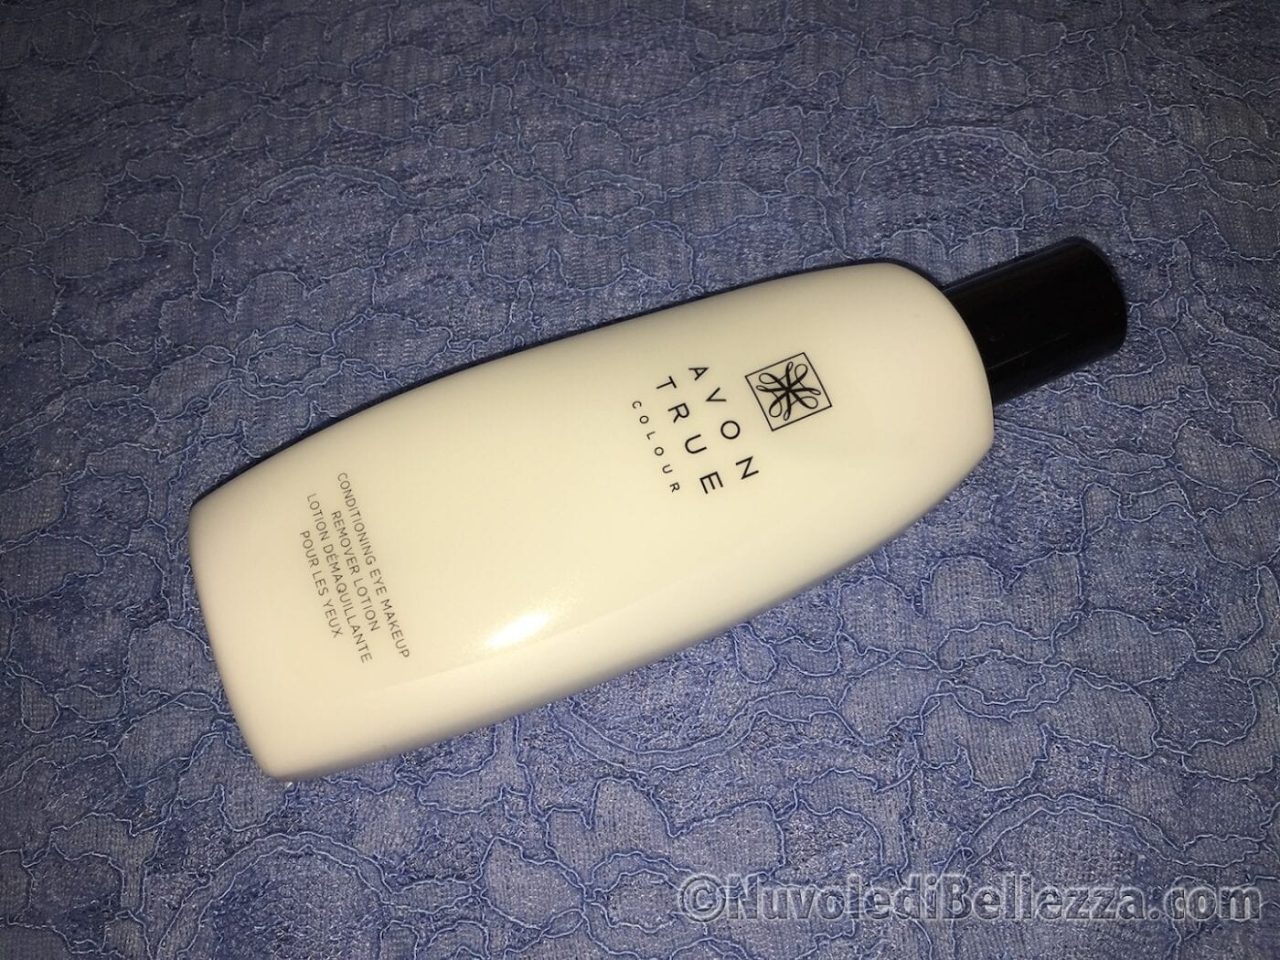  Conditioning Eye Make Up Remover Lotion